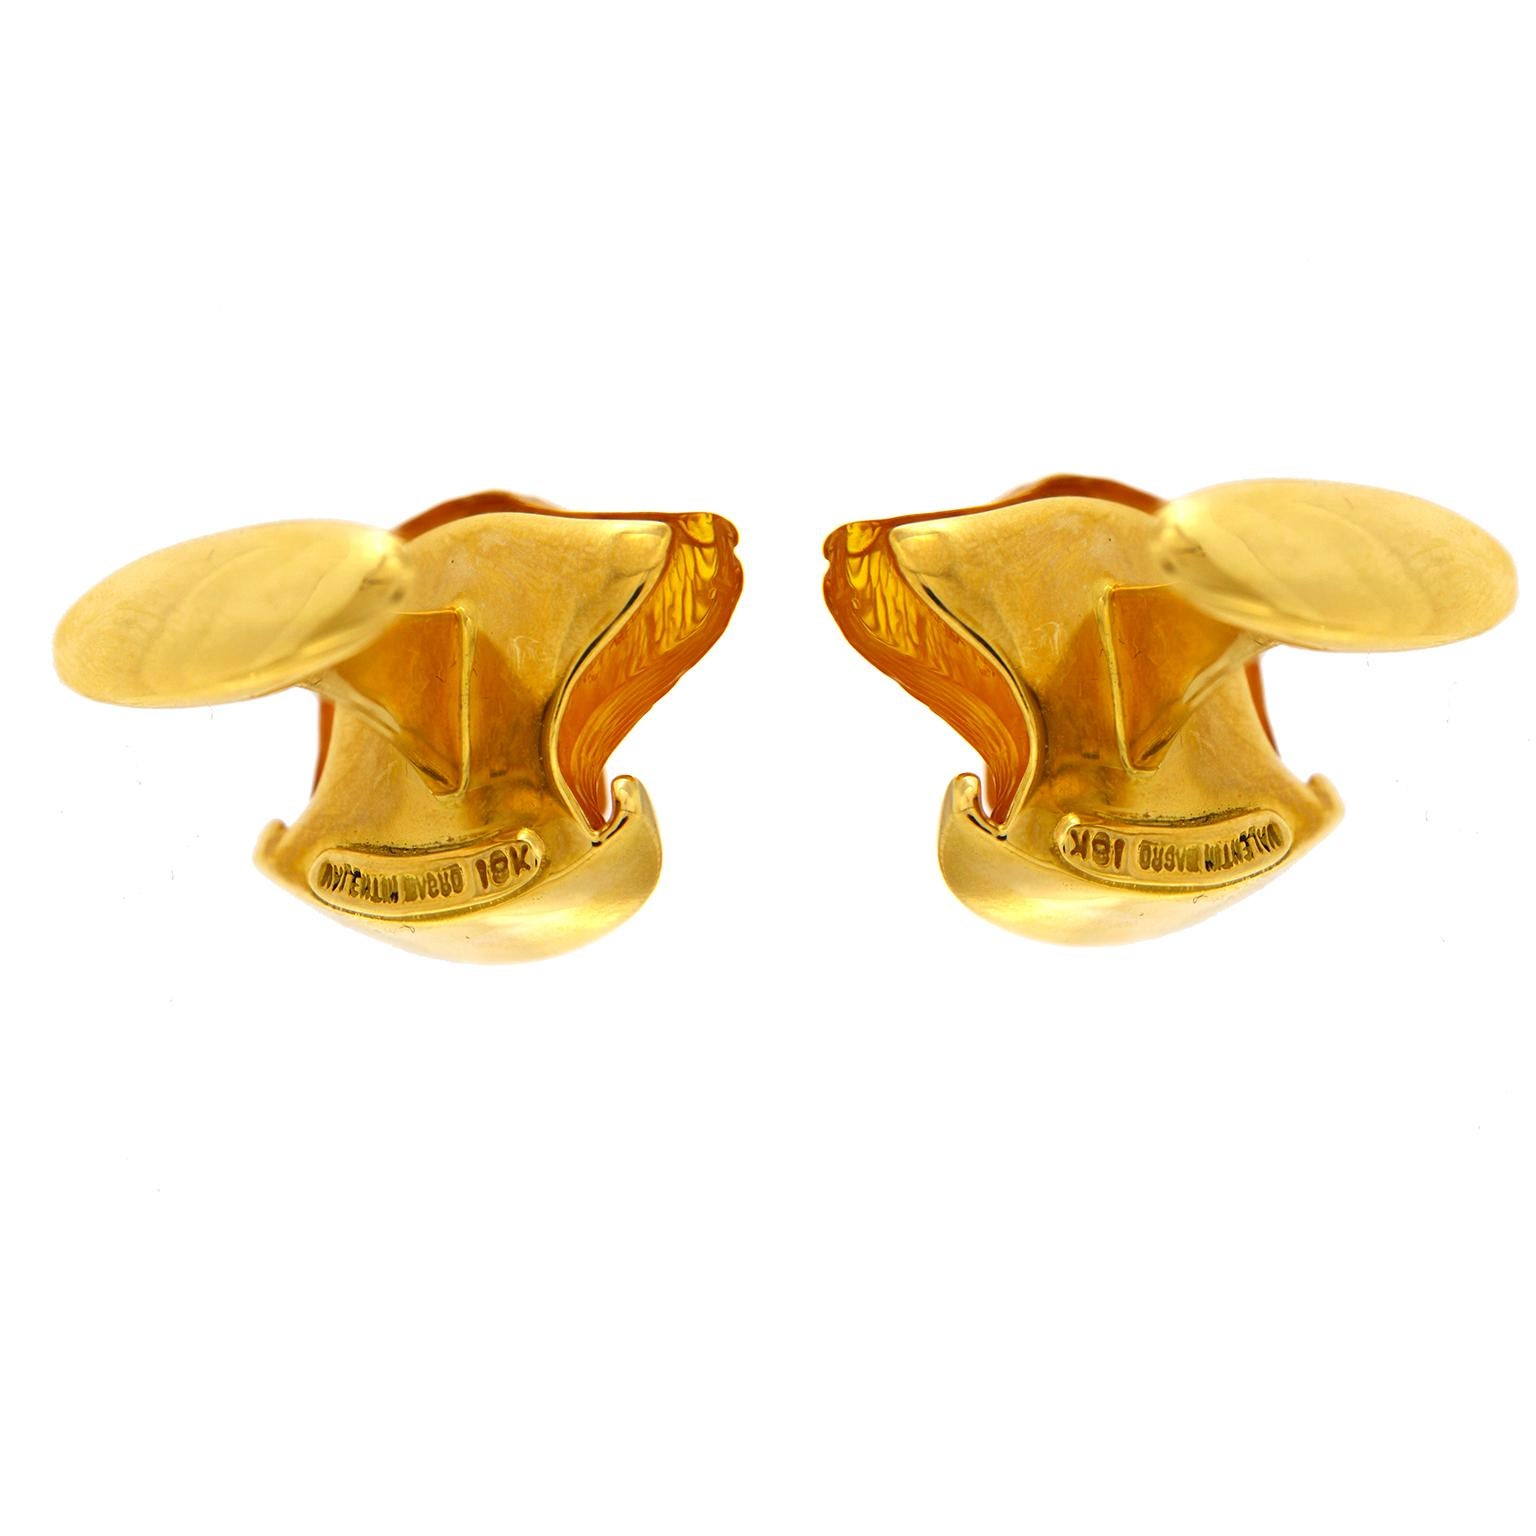 Valentin Magro Carved Amber Labrador 18K Yellow Gold Cufflinks In New Condition For Sale In New York, NY